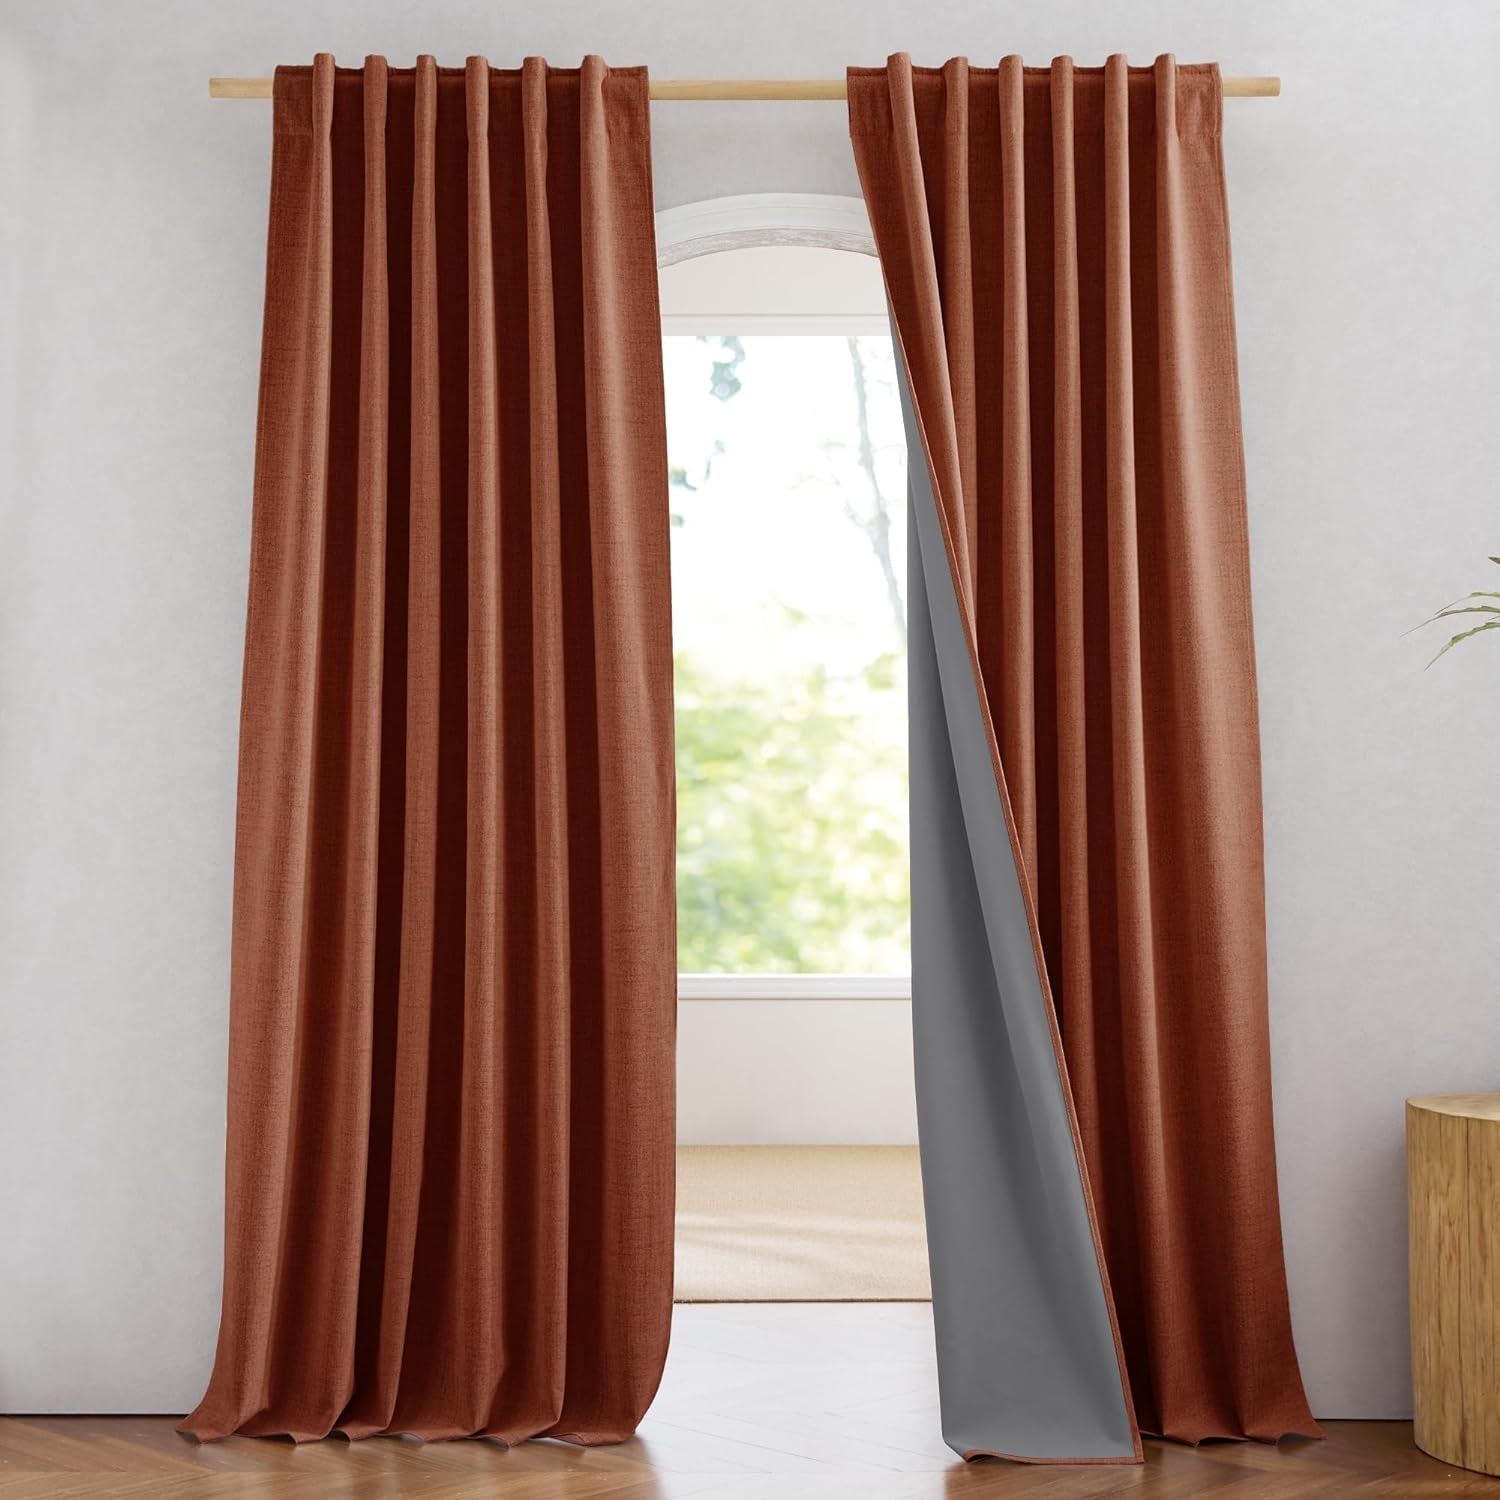 NICETOWN 100% Blackout Linen Curtains for Living Room with Thermal Insulated White Liner, Ivory, 52" Wide, 2 Panels, 84" Long Drapes, Back Tab Retro Linen Curtains Vertical Drapes Privacy for Bedroom  NICETOWN Burnt Orange W52 X L90 